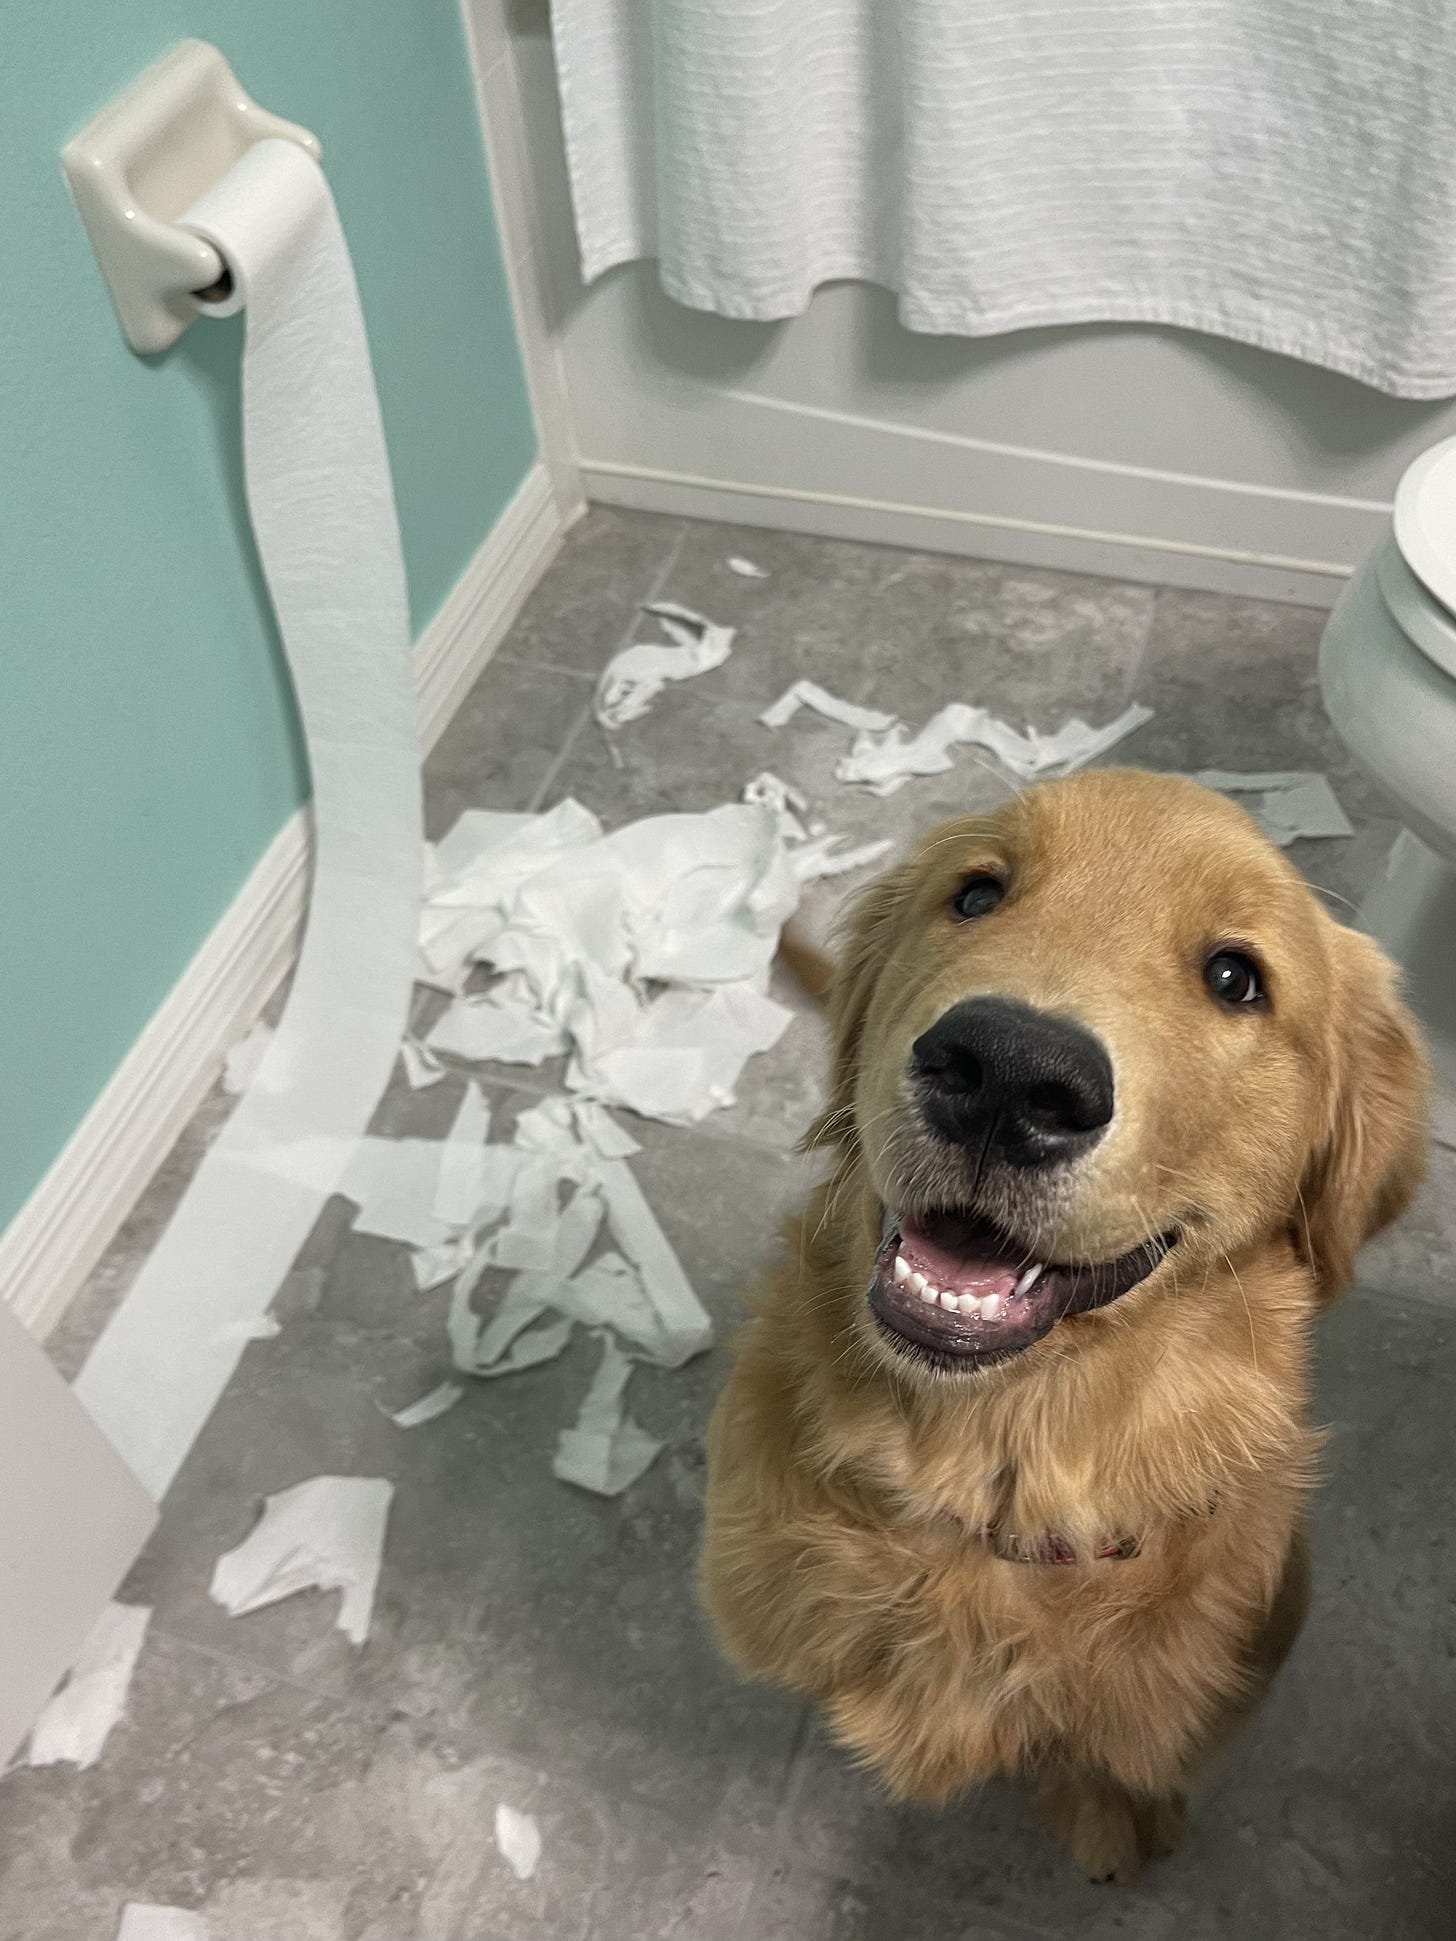 a happy golden retriever puppy sitting next to ripped up toilet paper roll